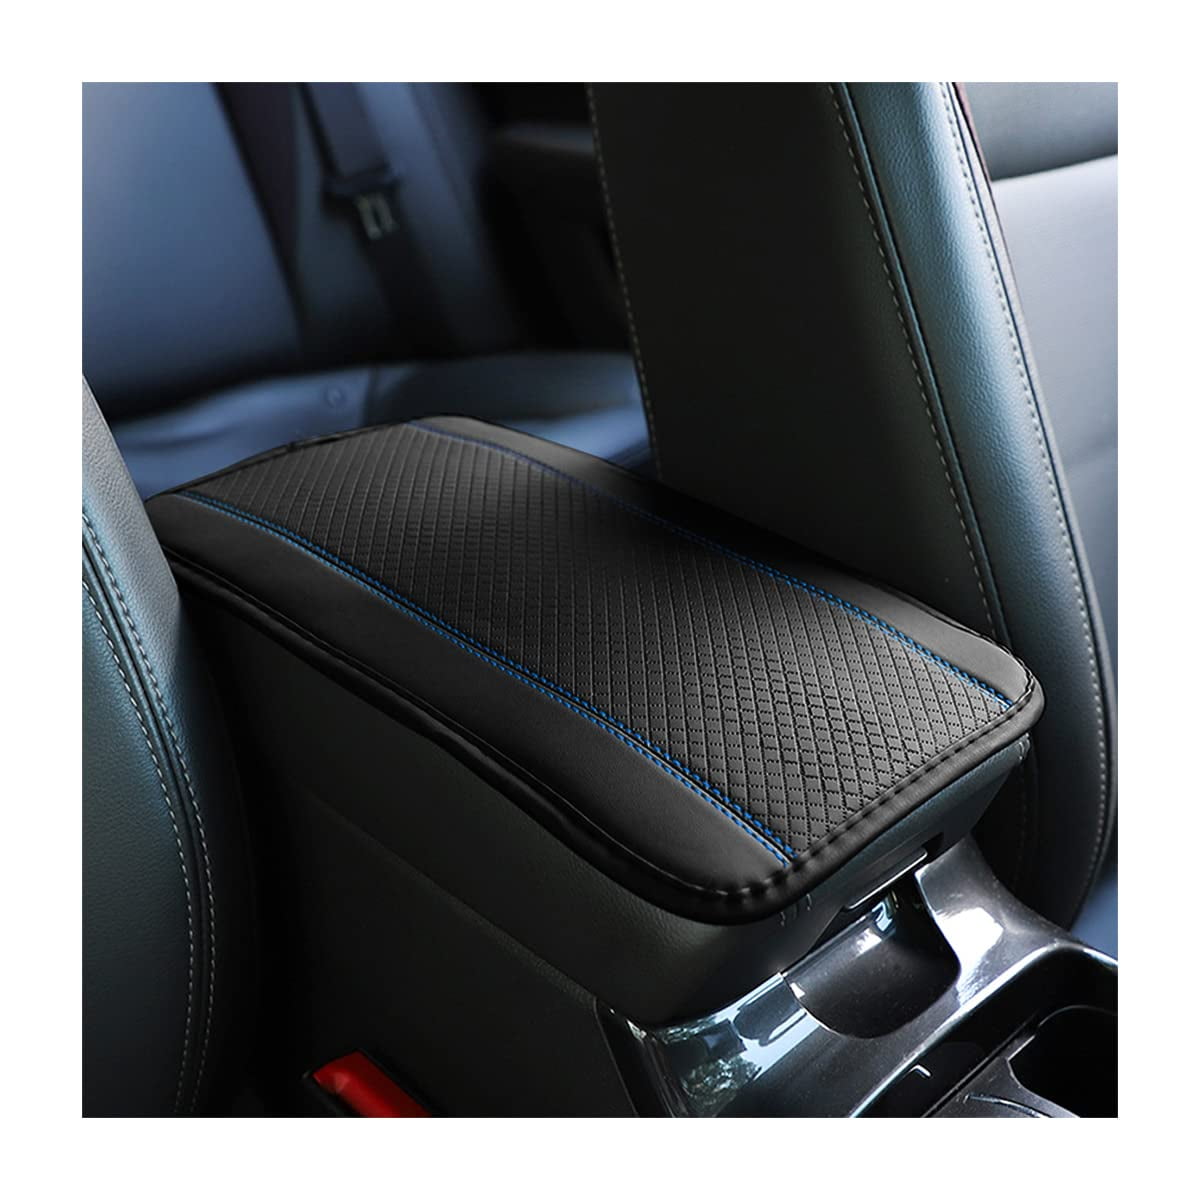 Auto Center Console Cover, Car Armrest Box Pad, Skin-Friendly Washable  Cotton Cloth, Anti-Slip, Armrest Cover Protector for Vehicle SUV Truck Car